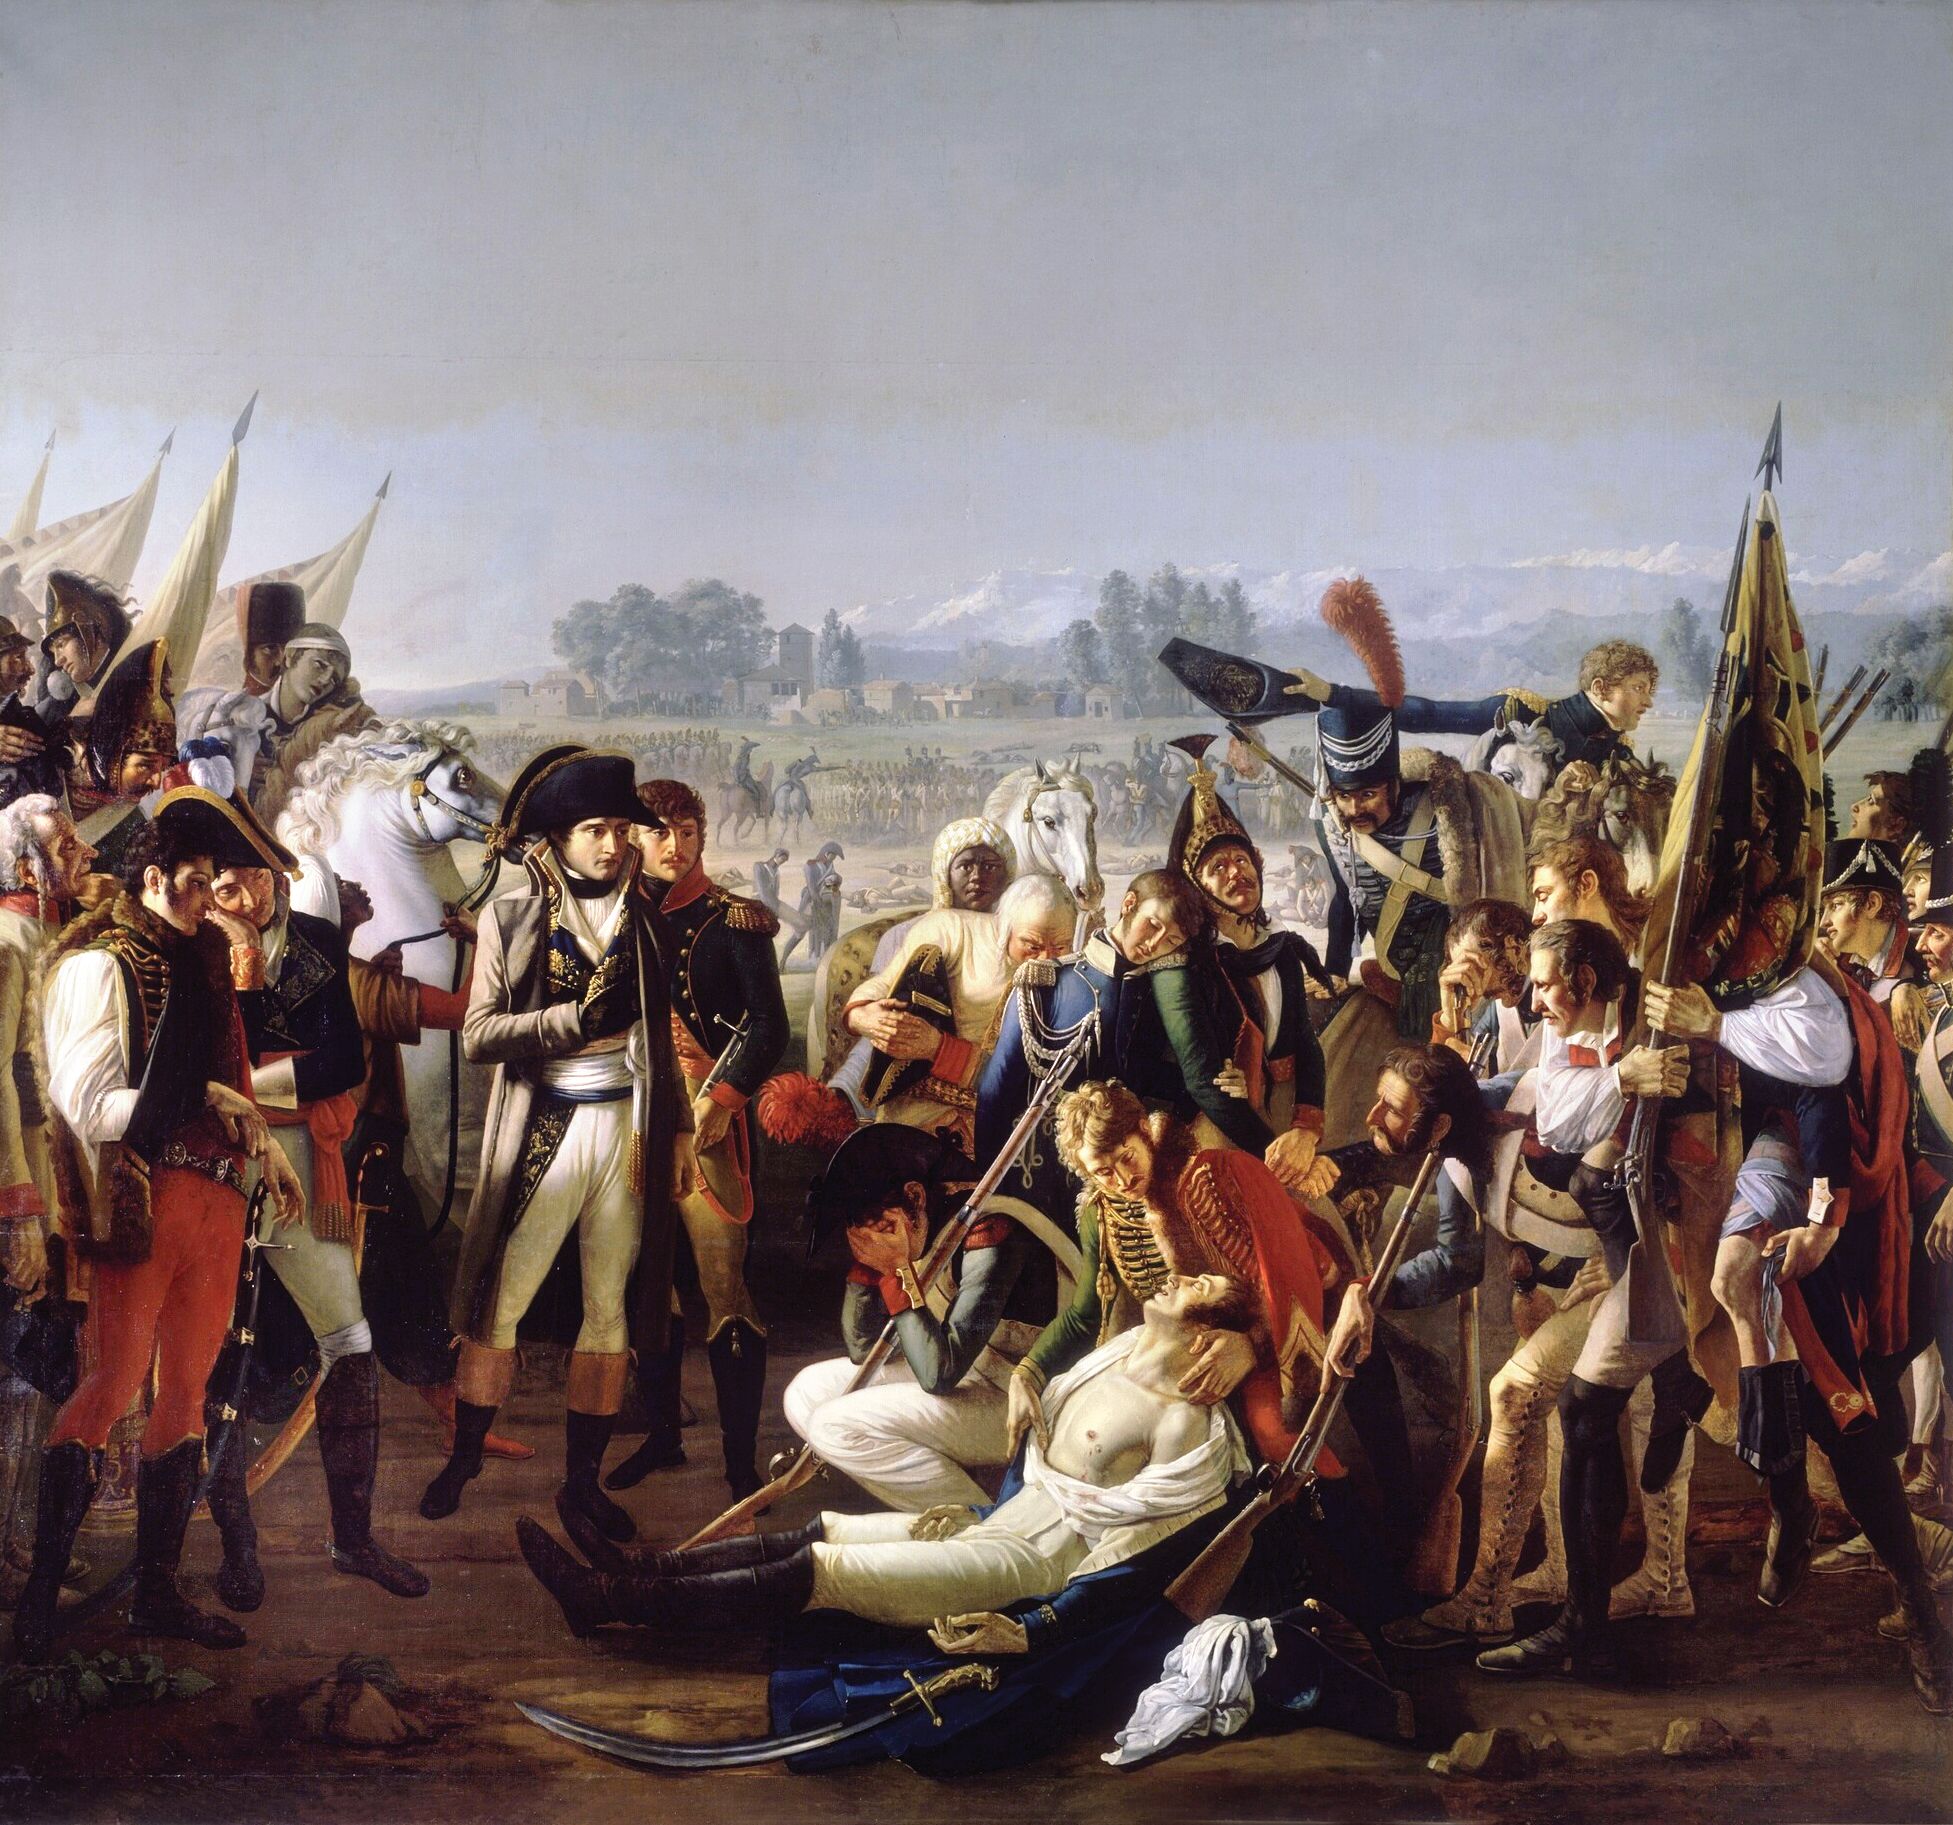 Napoleon is shown the body of General Louis Desaix. Grief-stricken Napoleon reportedly exclaimed, "Why am I not allowed to weep?" He later errected two monuments in Paris to honor Desaix